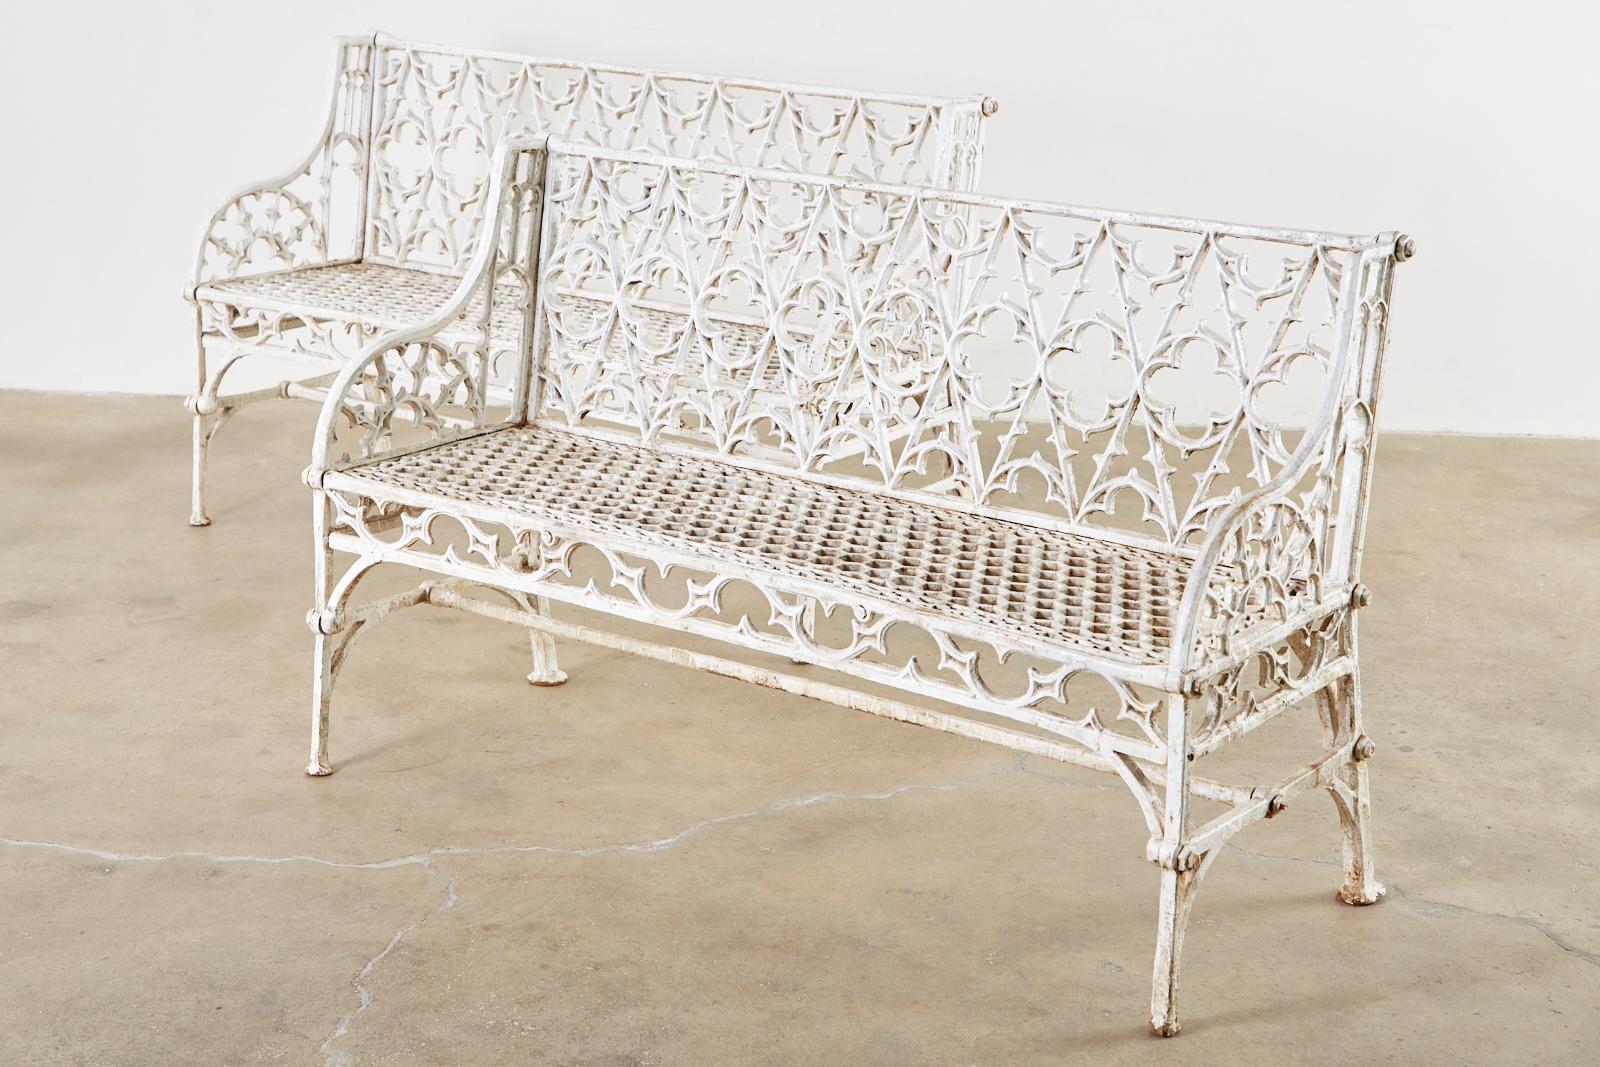 English Coalbrookdale foundry attributed cast iron garden benches. Made in the gothic revival English taste featuring gothic tracery backrest centered by quatrefoil designs. The gracefully curved arms enclosing demilune motif patterns. The seat has